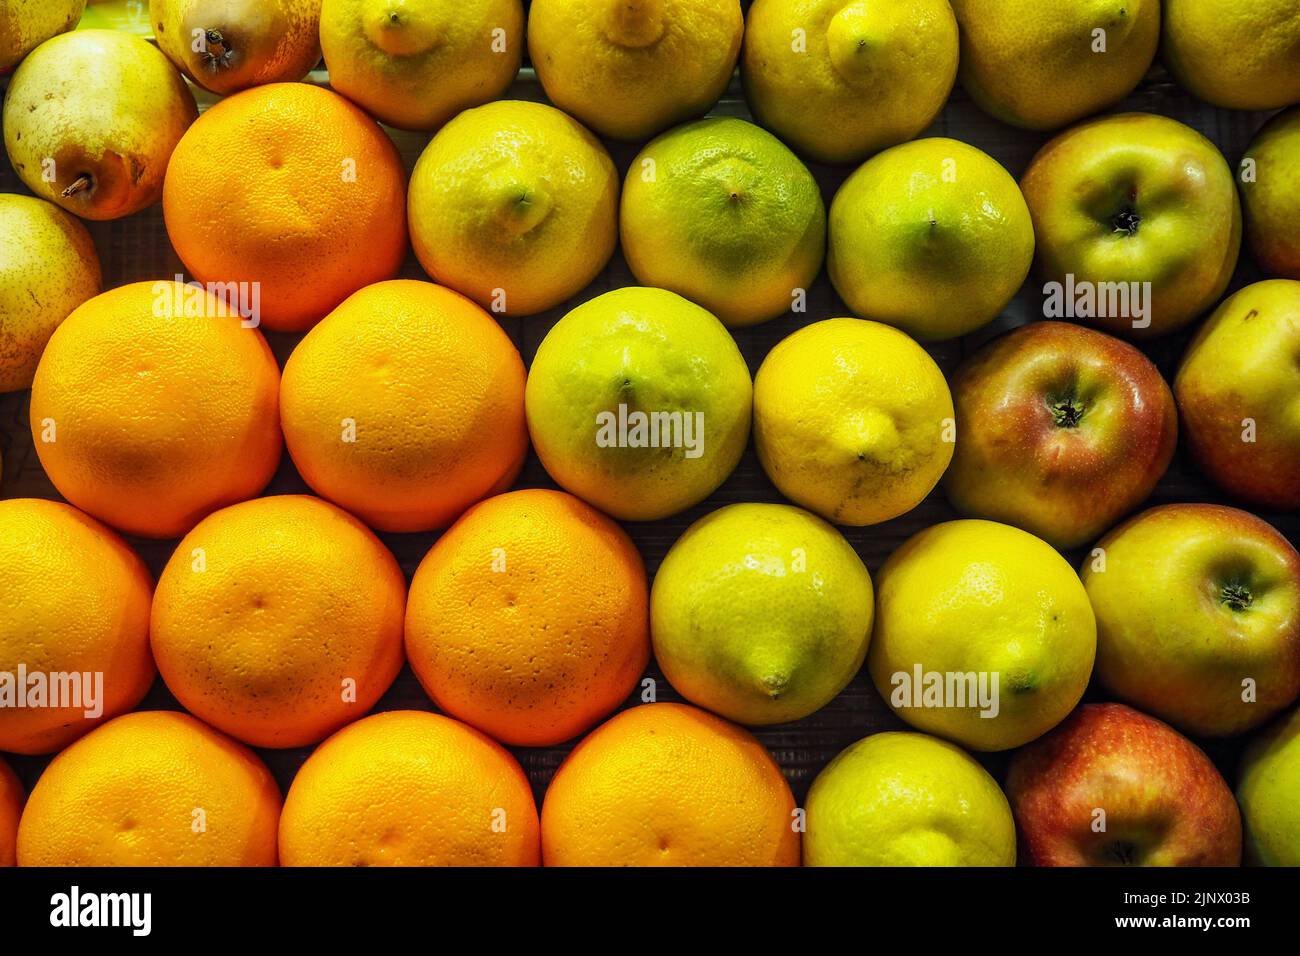 Oranges, pears, lemons and apples arranged nicely on street fruit market in Morocco Stock Photo